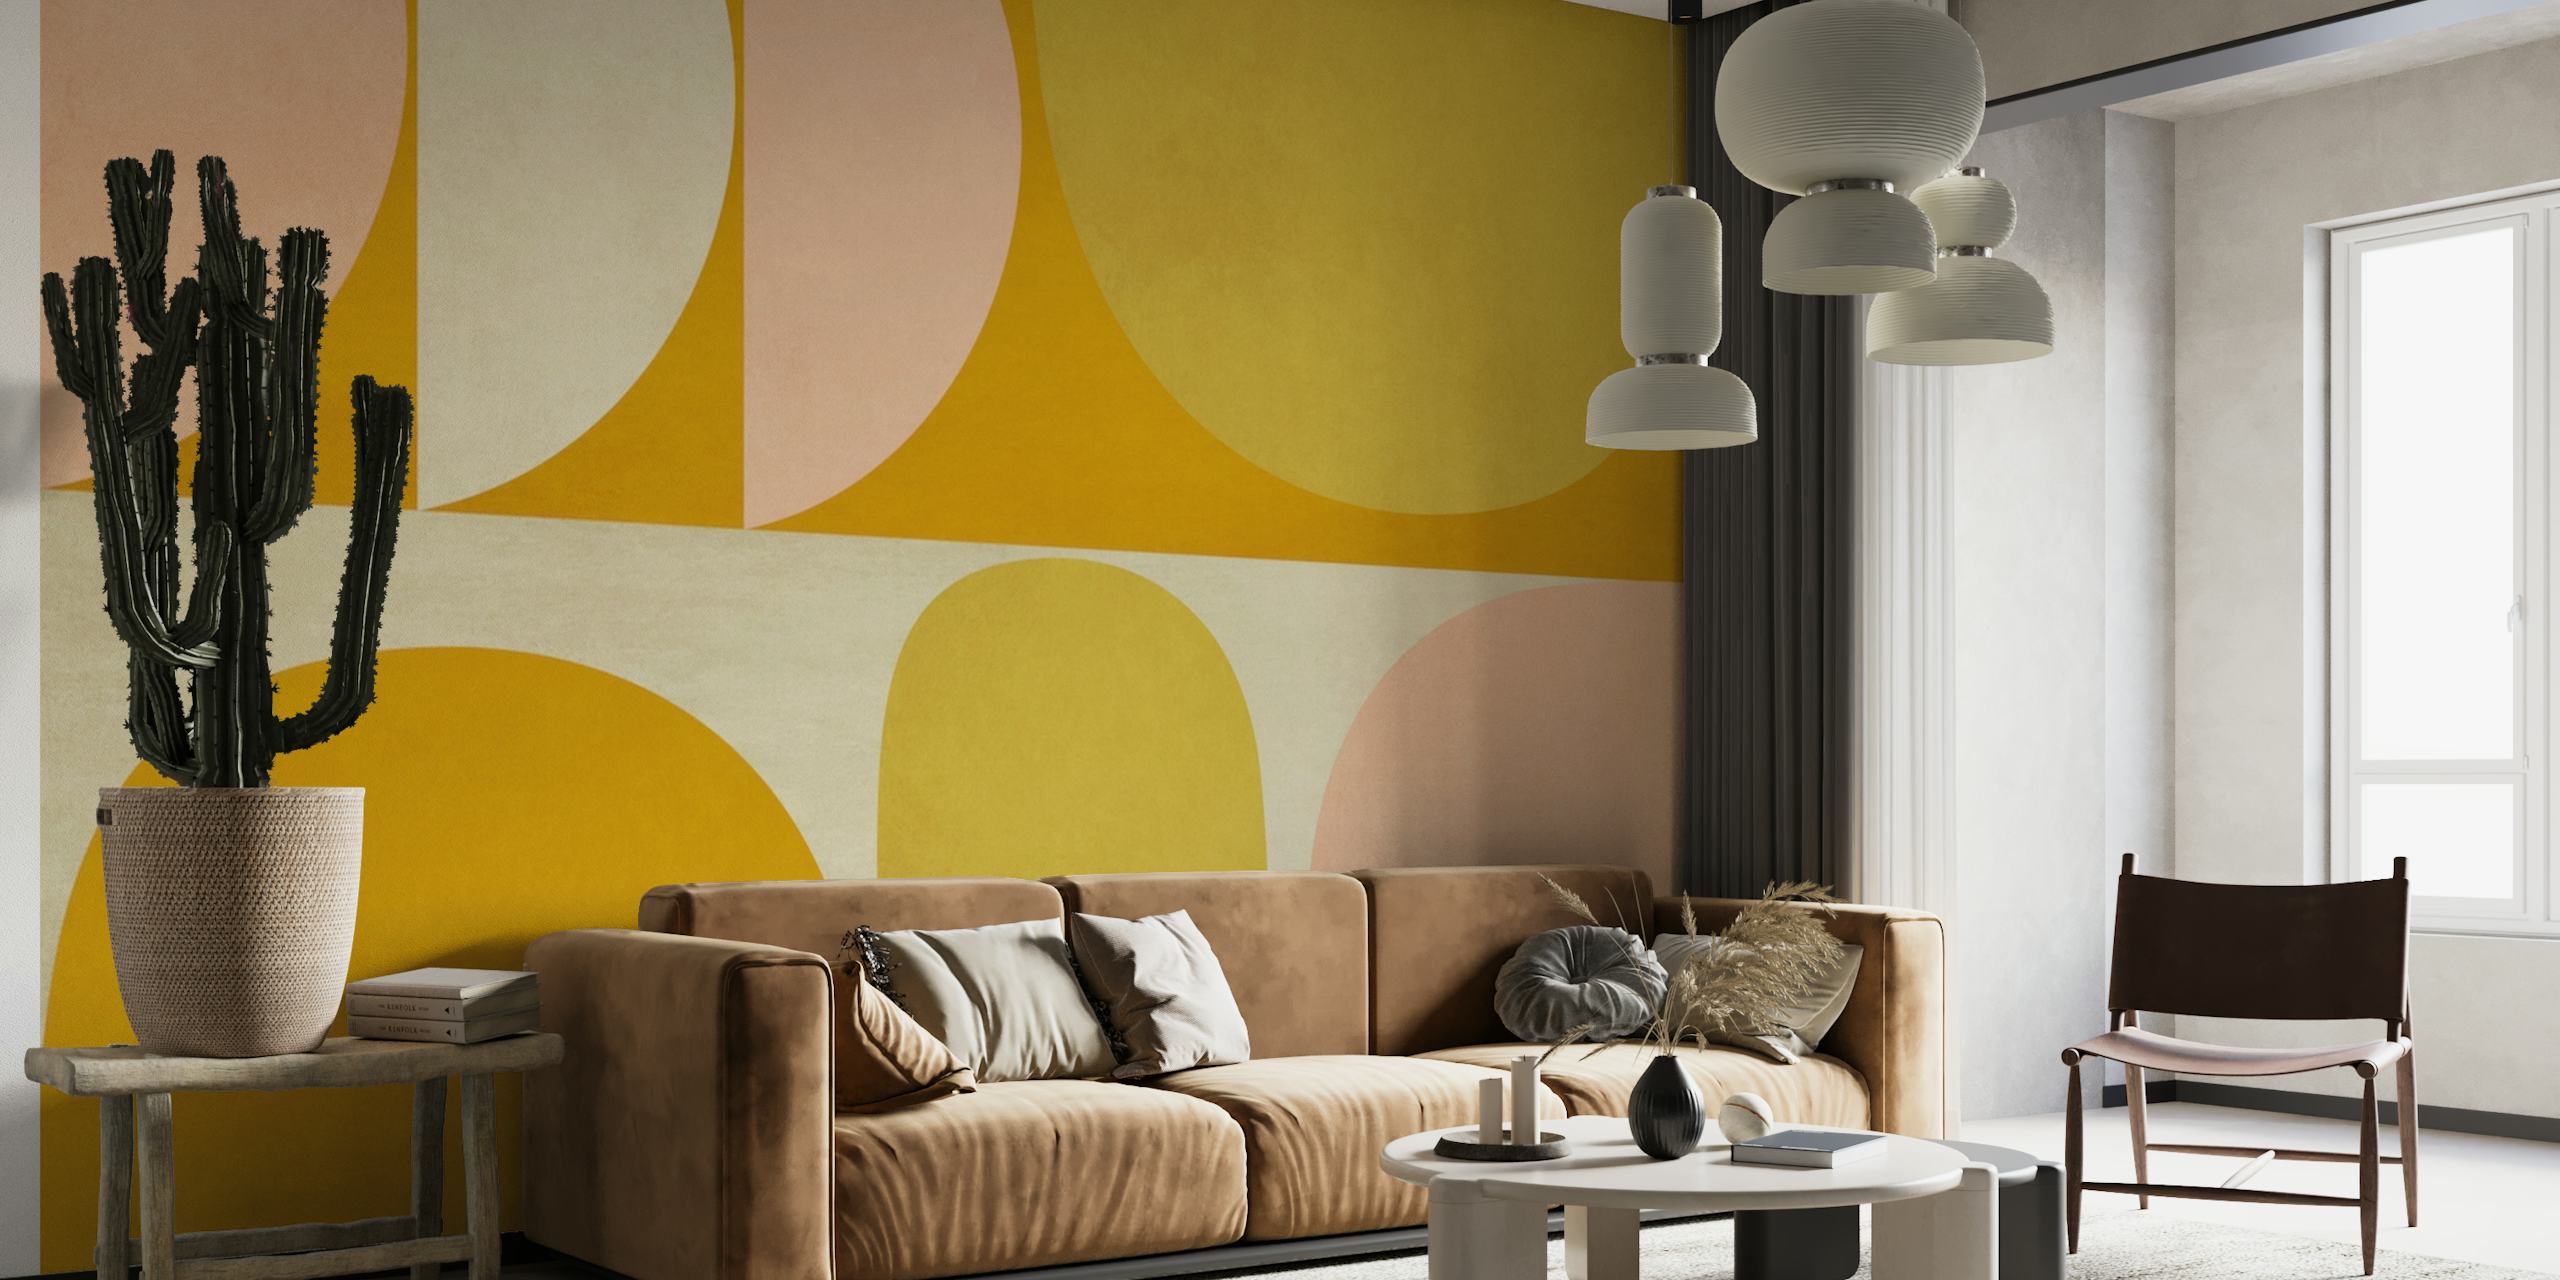 Abstract G6 In wall mural with geometric circles in mustard, peach and cream